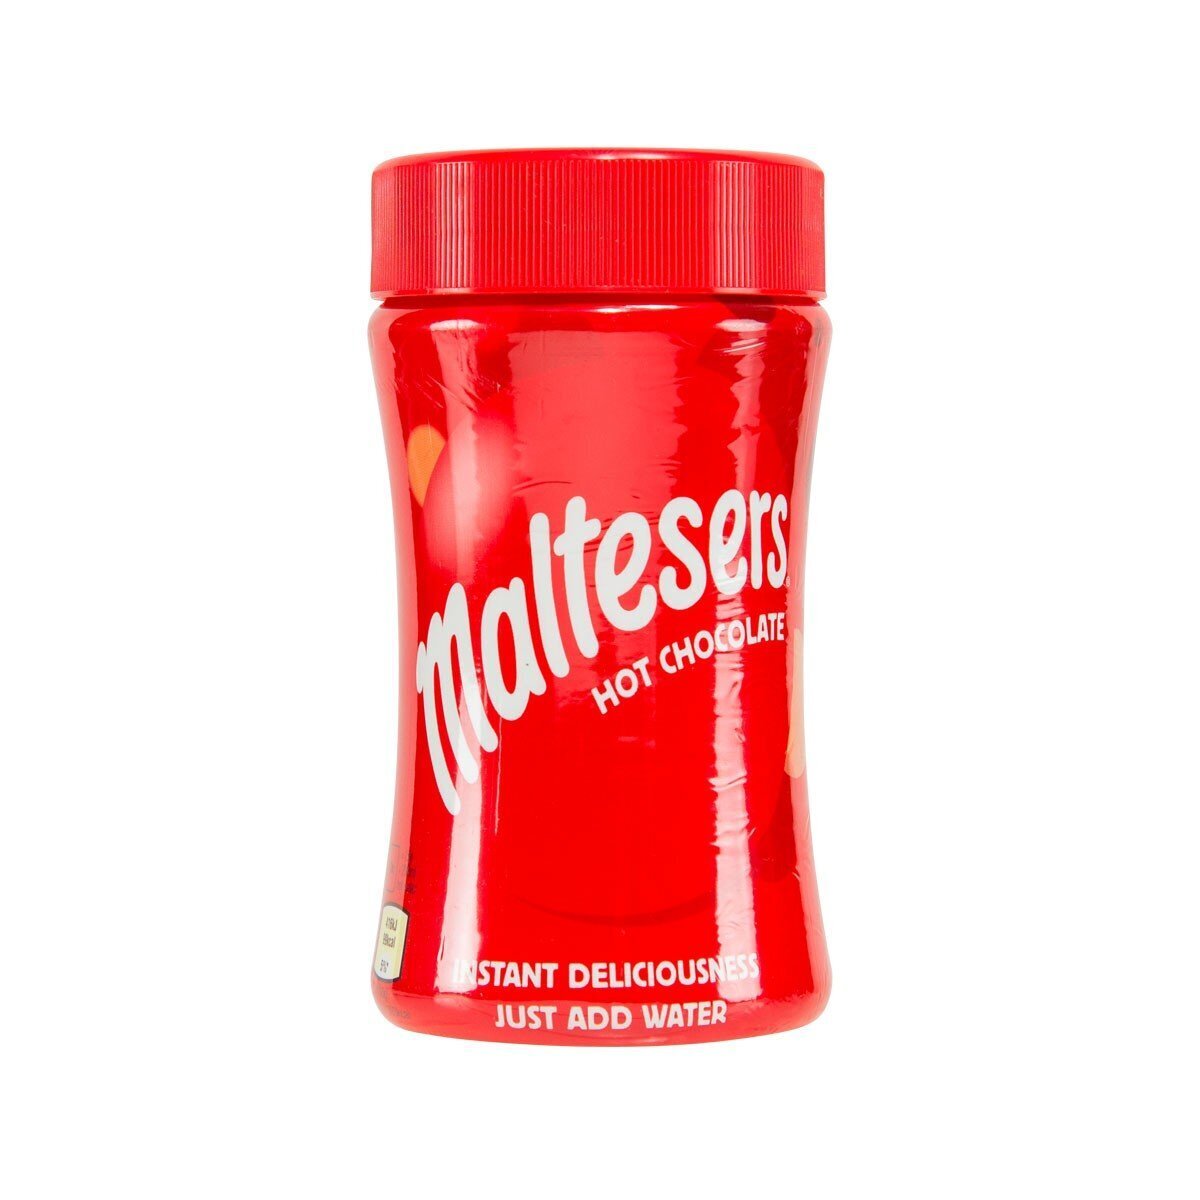 Maltesers Instant Malty Hot Chocolate (180G)